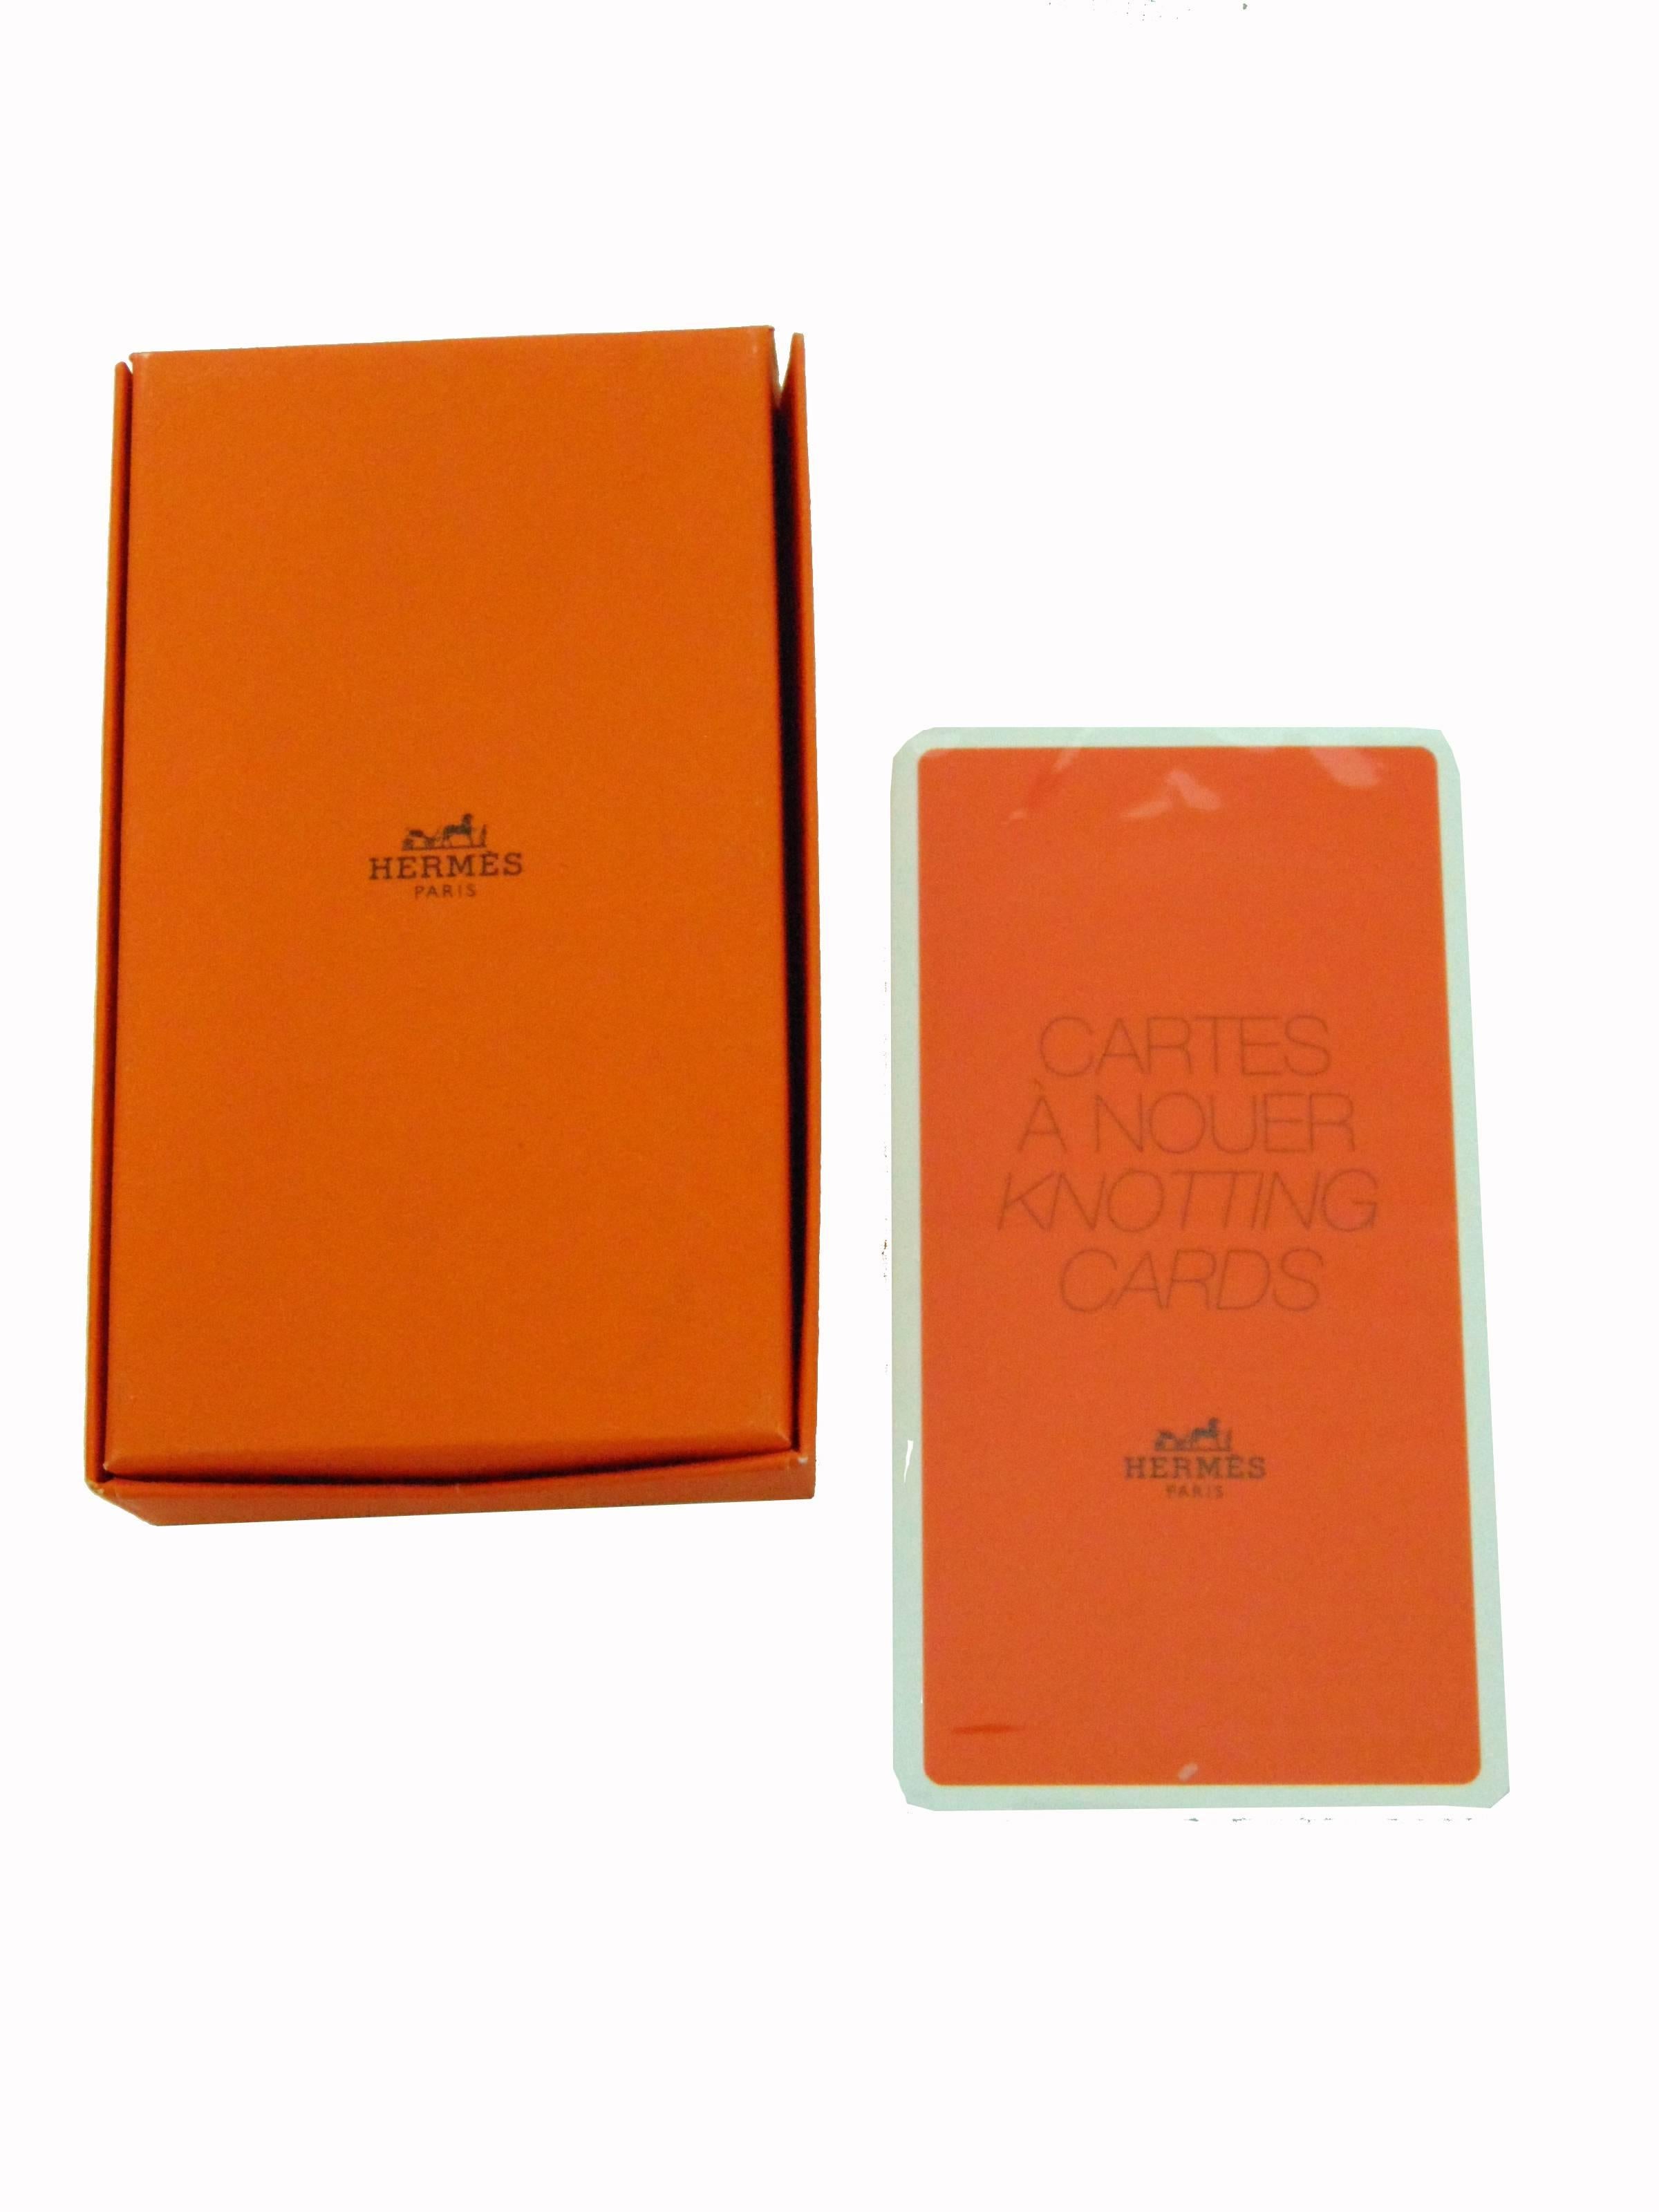 A boxed set of knotting cards from Hermes, which provide detailed instructions and photo examples on different ways to tie their scarves and shawls.  This set is new and unopened.  